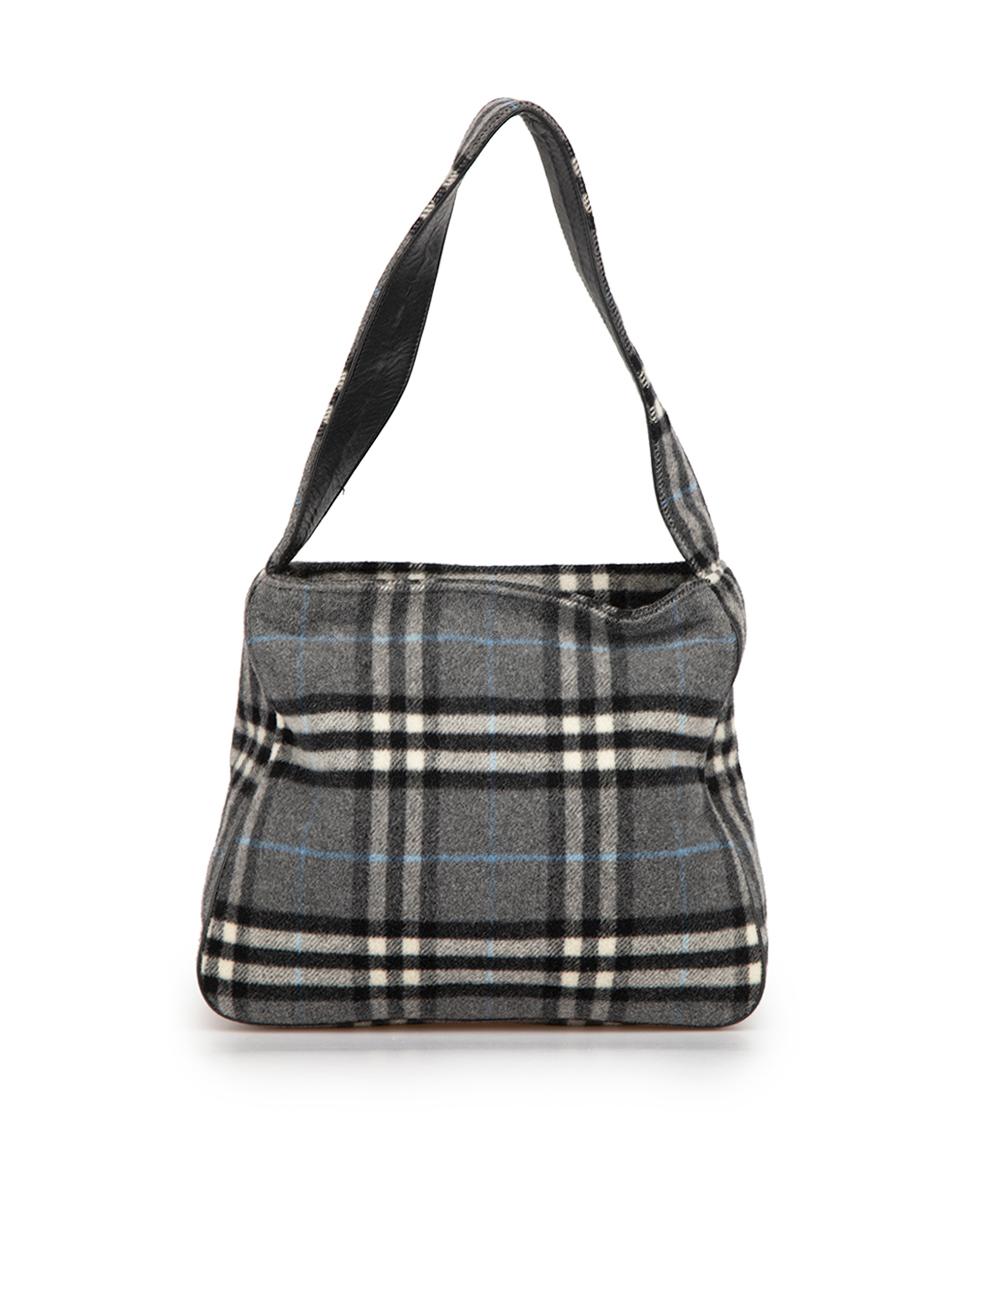 Burberry Burberrys Vintage Grey Nova Check Hobo Bag In Excellent Condition In London, GB